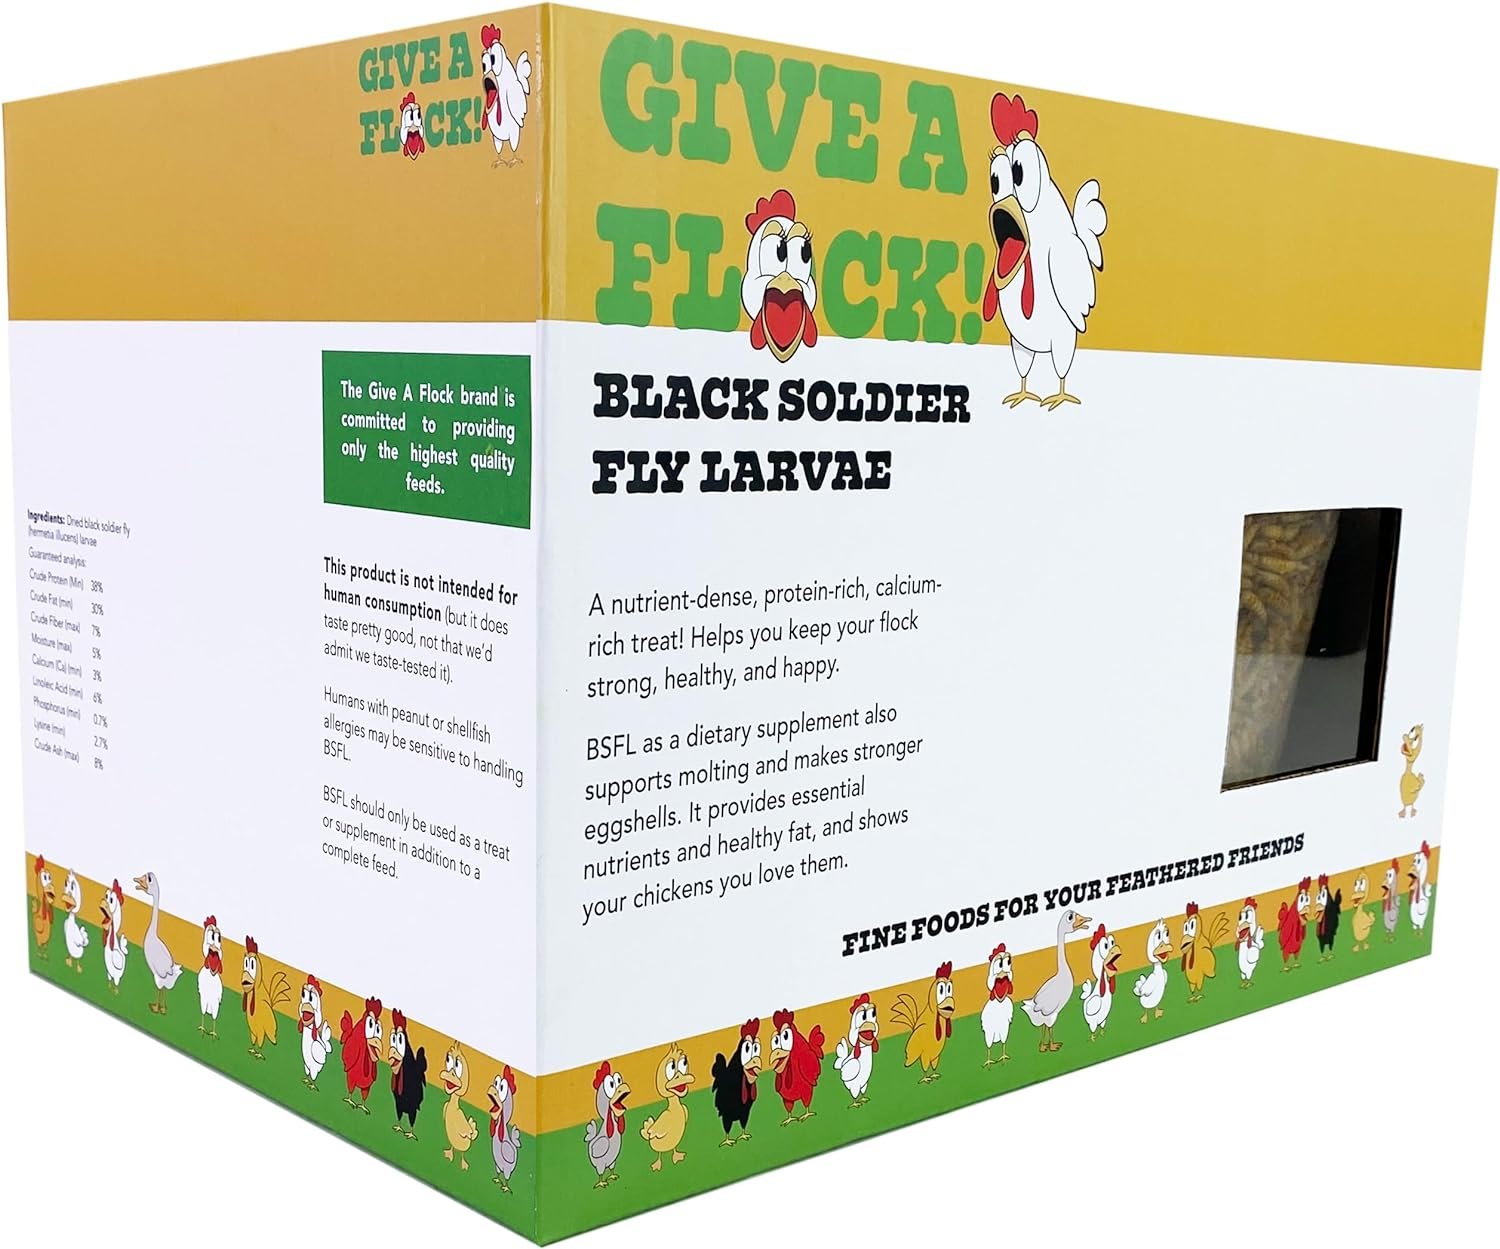 Give a Flock (10 Pounds) Dried Black Soldier Fly Larvae 100% Natural Non-GMO BSF More Calium Than Meal Worms Grub Treats for Chickens, Ducks, Geese, Quails, Wild Birds, Reptiles (10LBS)